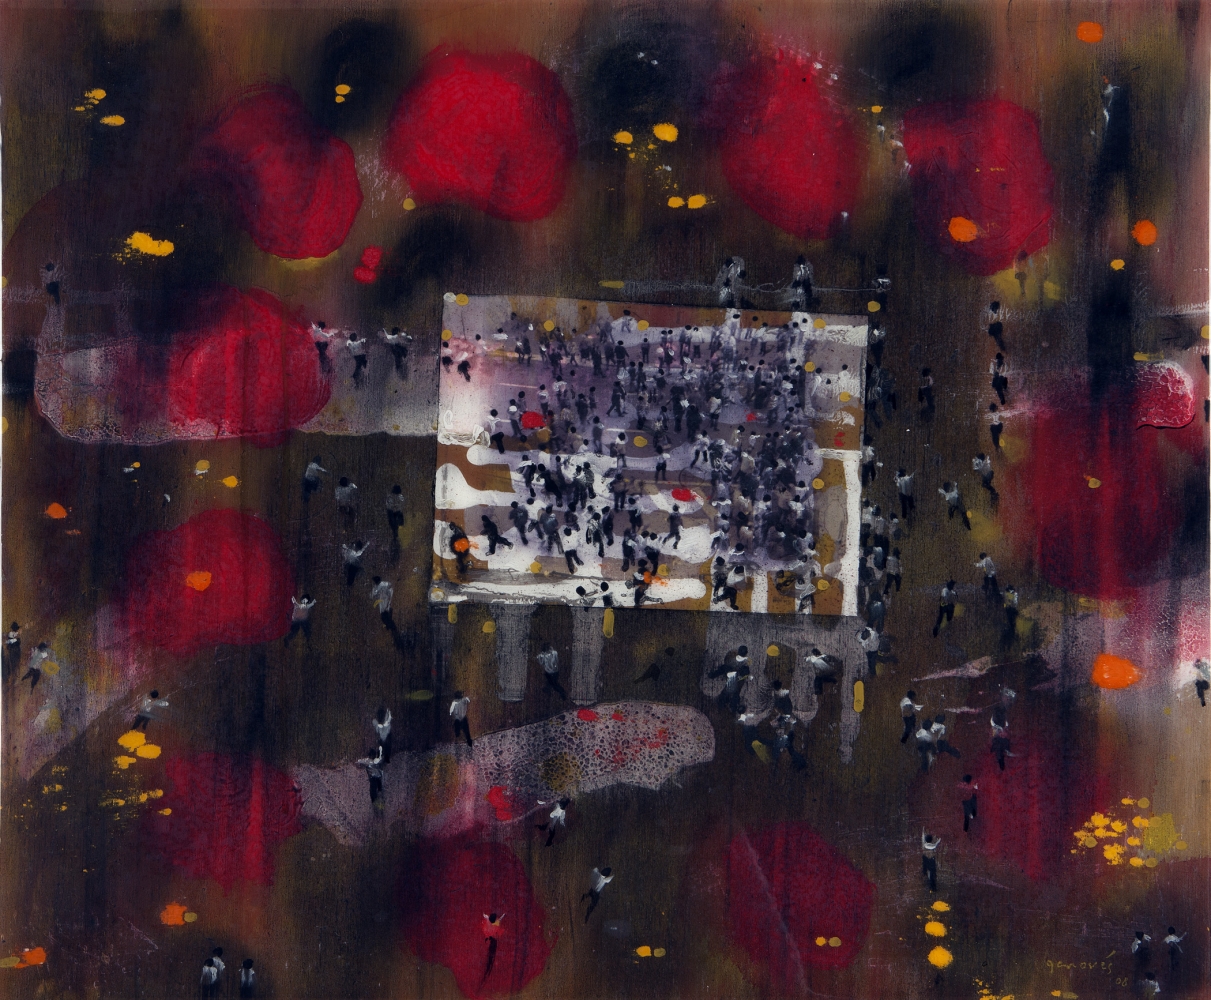 Abstract painting of red and black coloring overlaying image of large crowds of people by Juan Genovés.